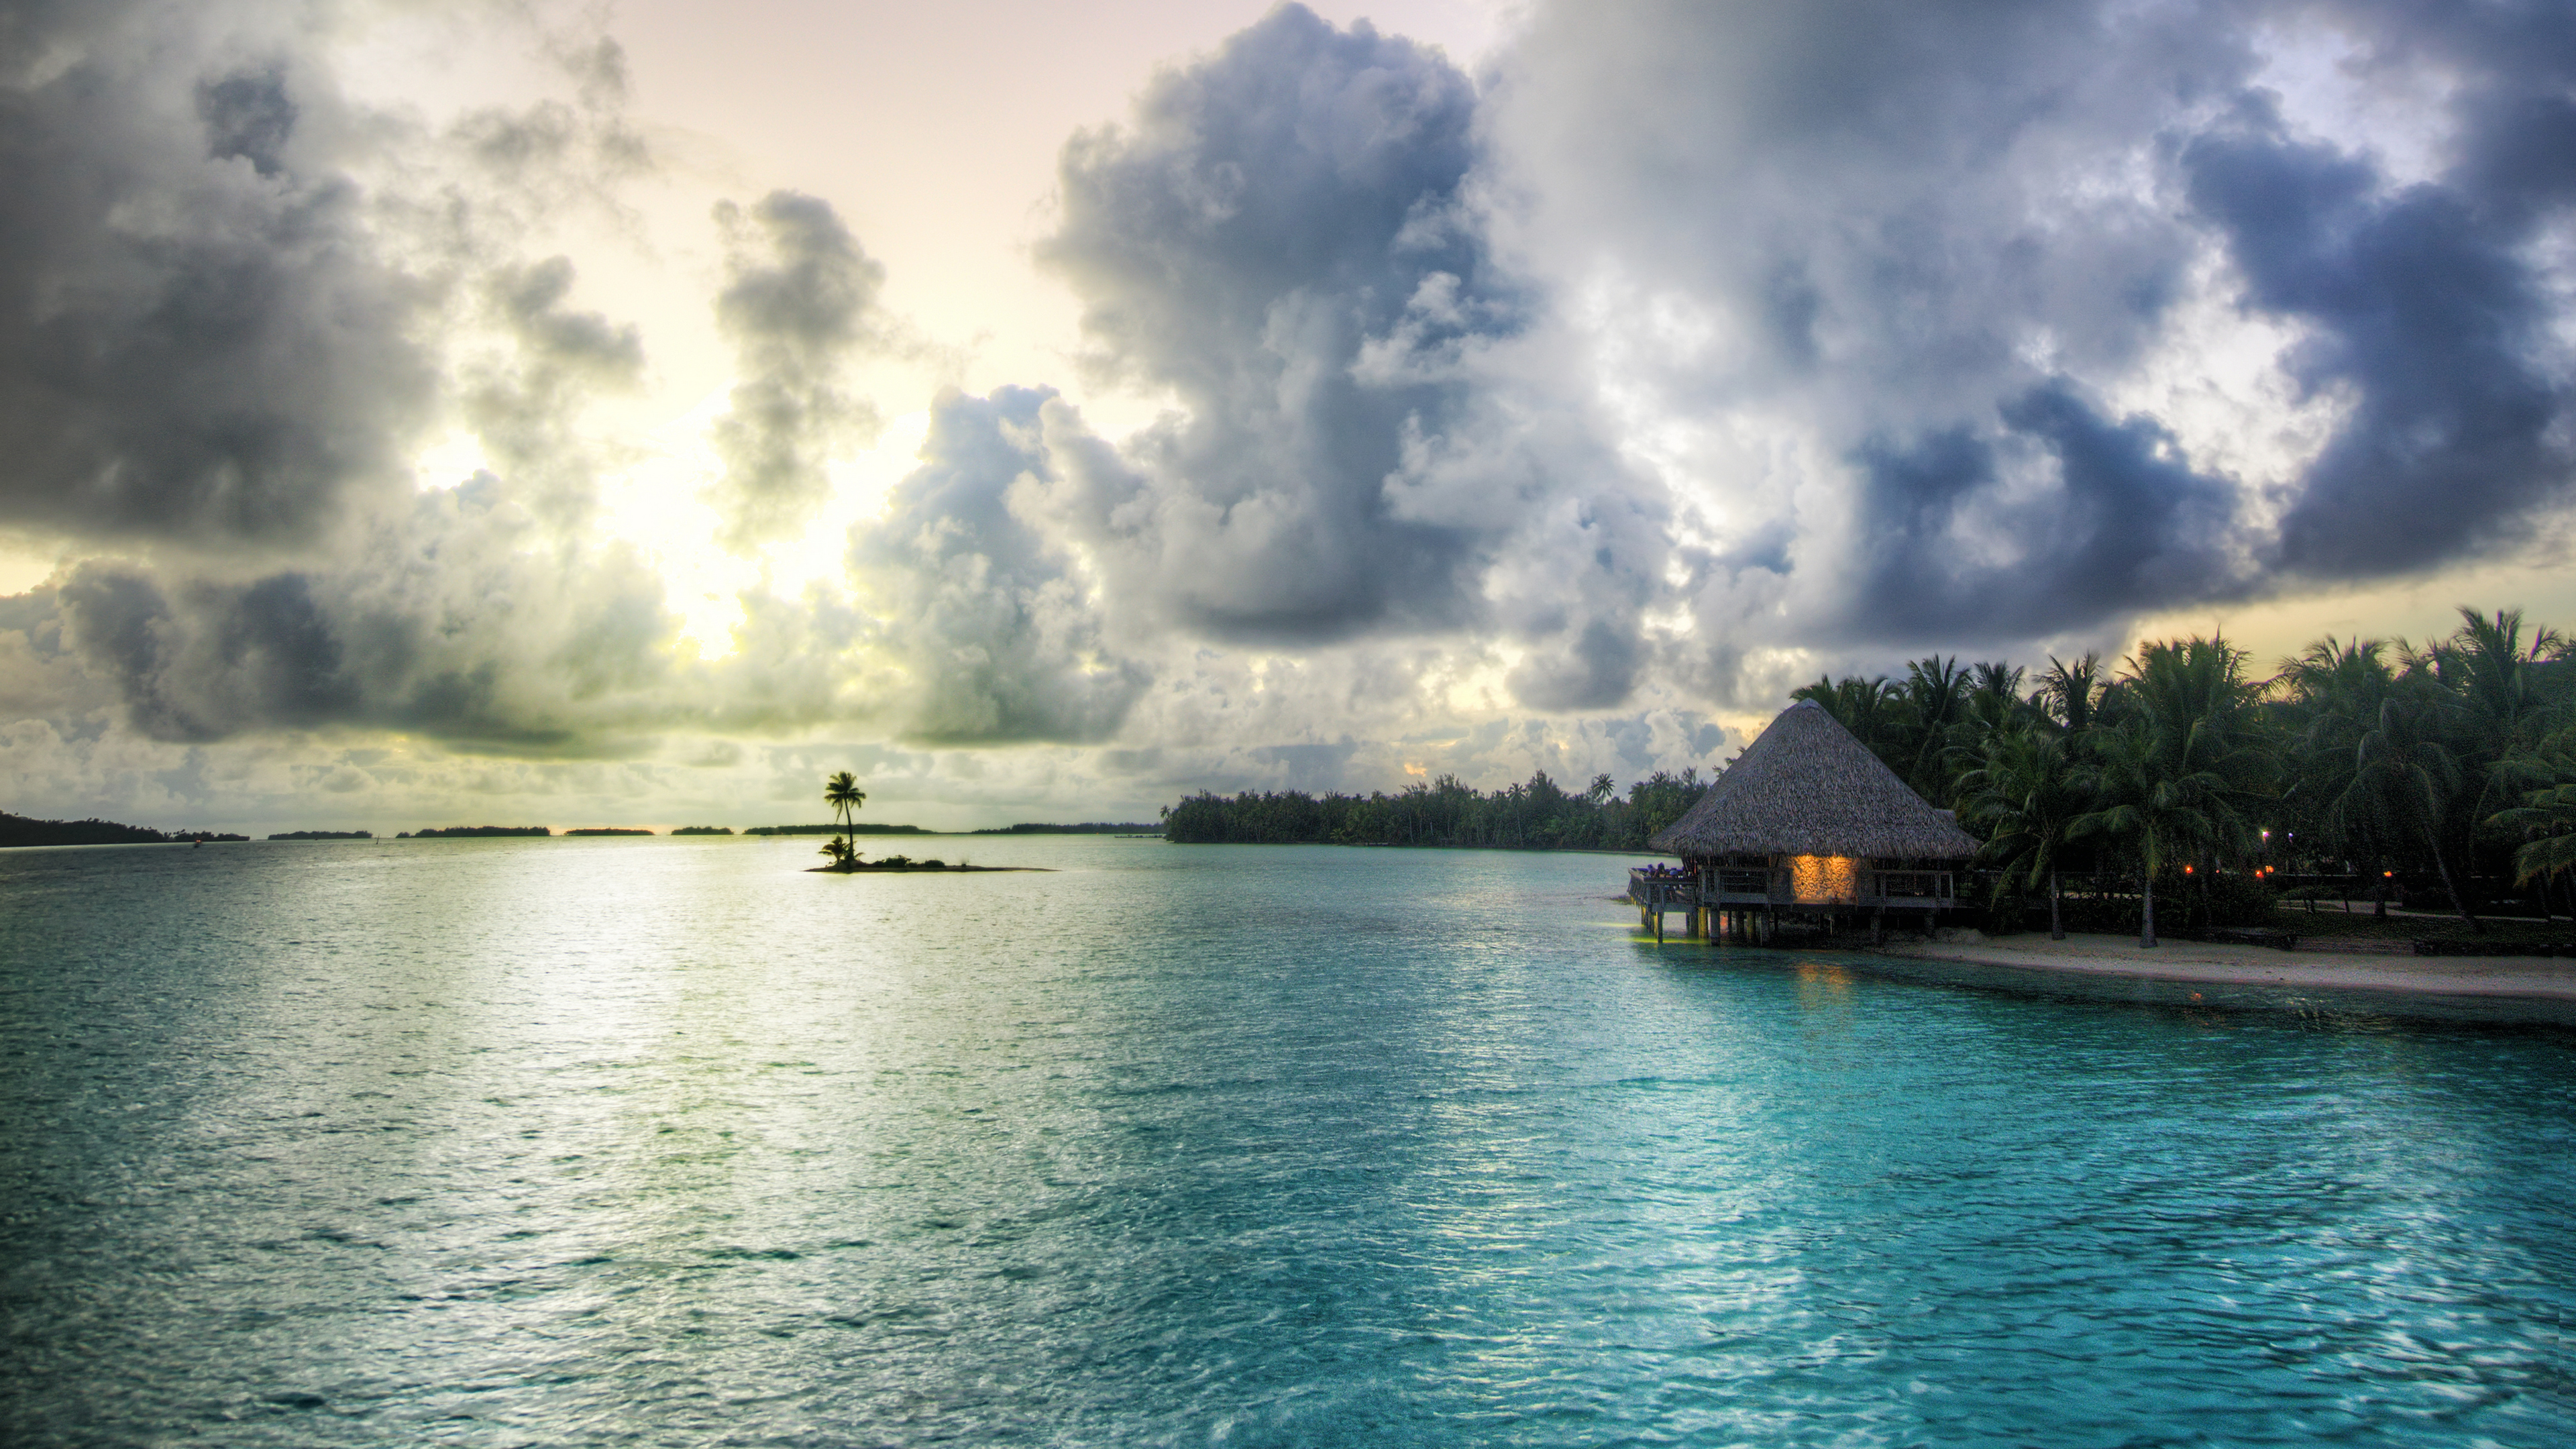 General 3840x2160 Trey Ratcliff photography landscape nature water sky clouds palm trees house